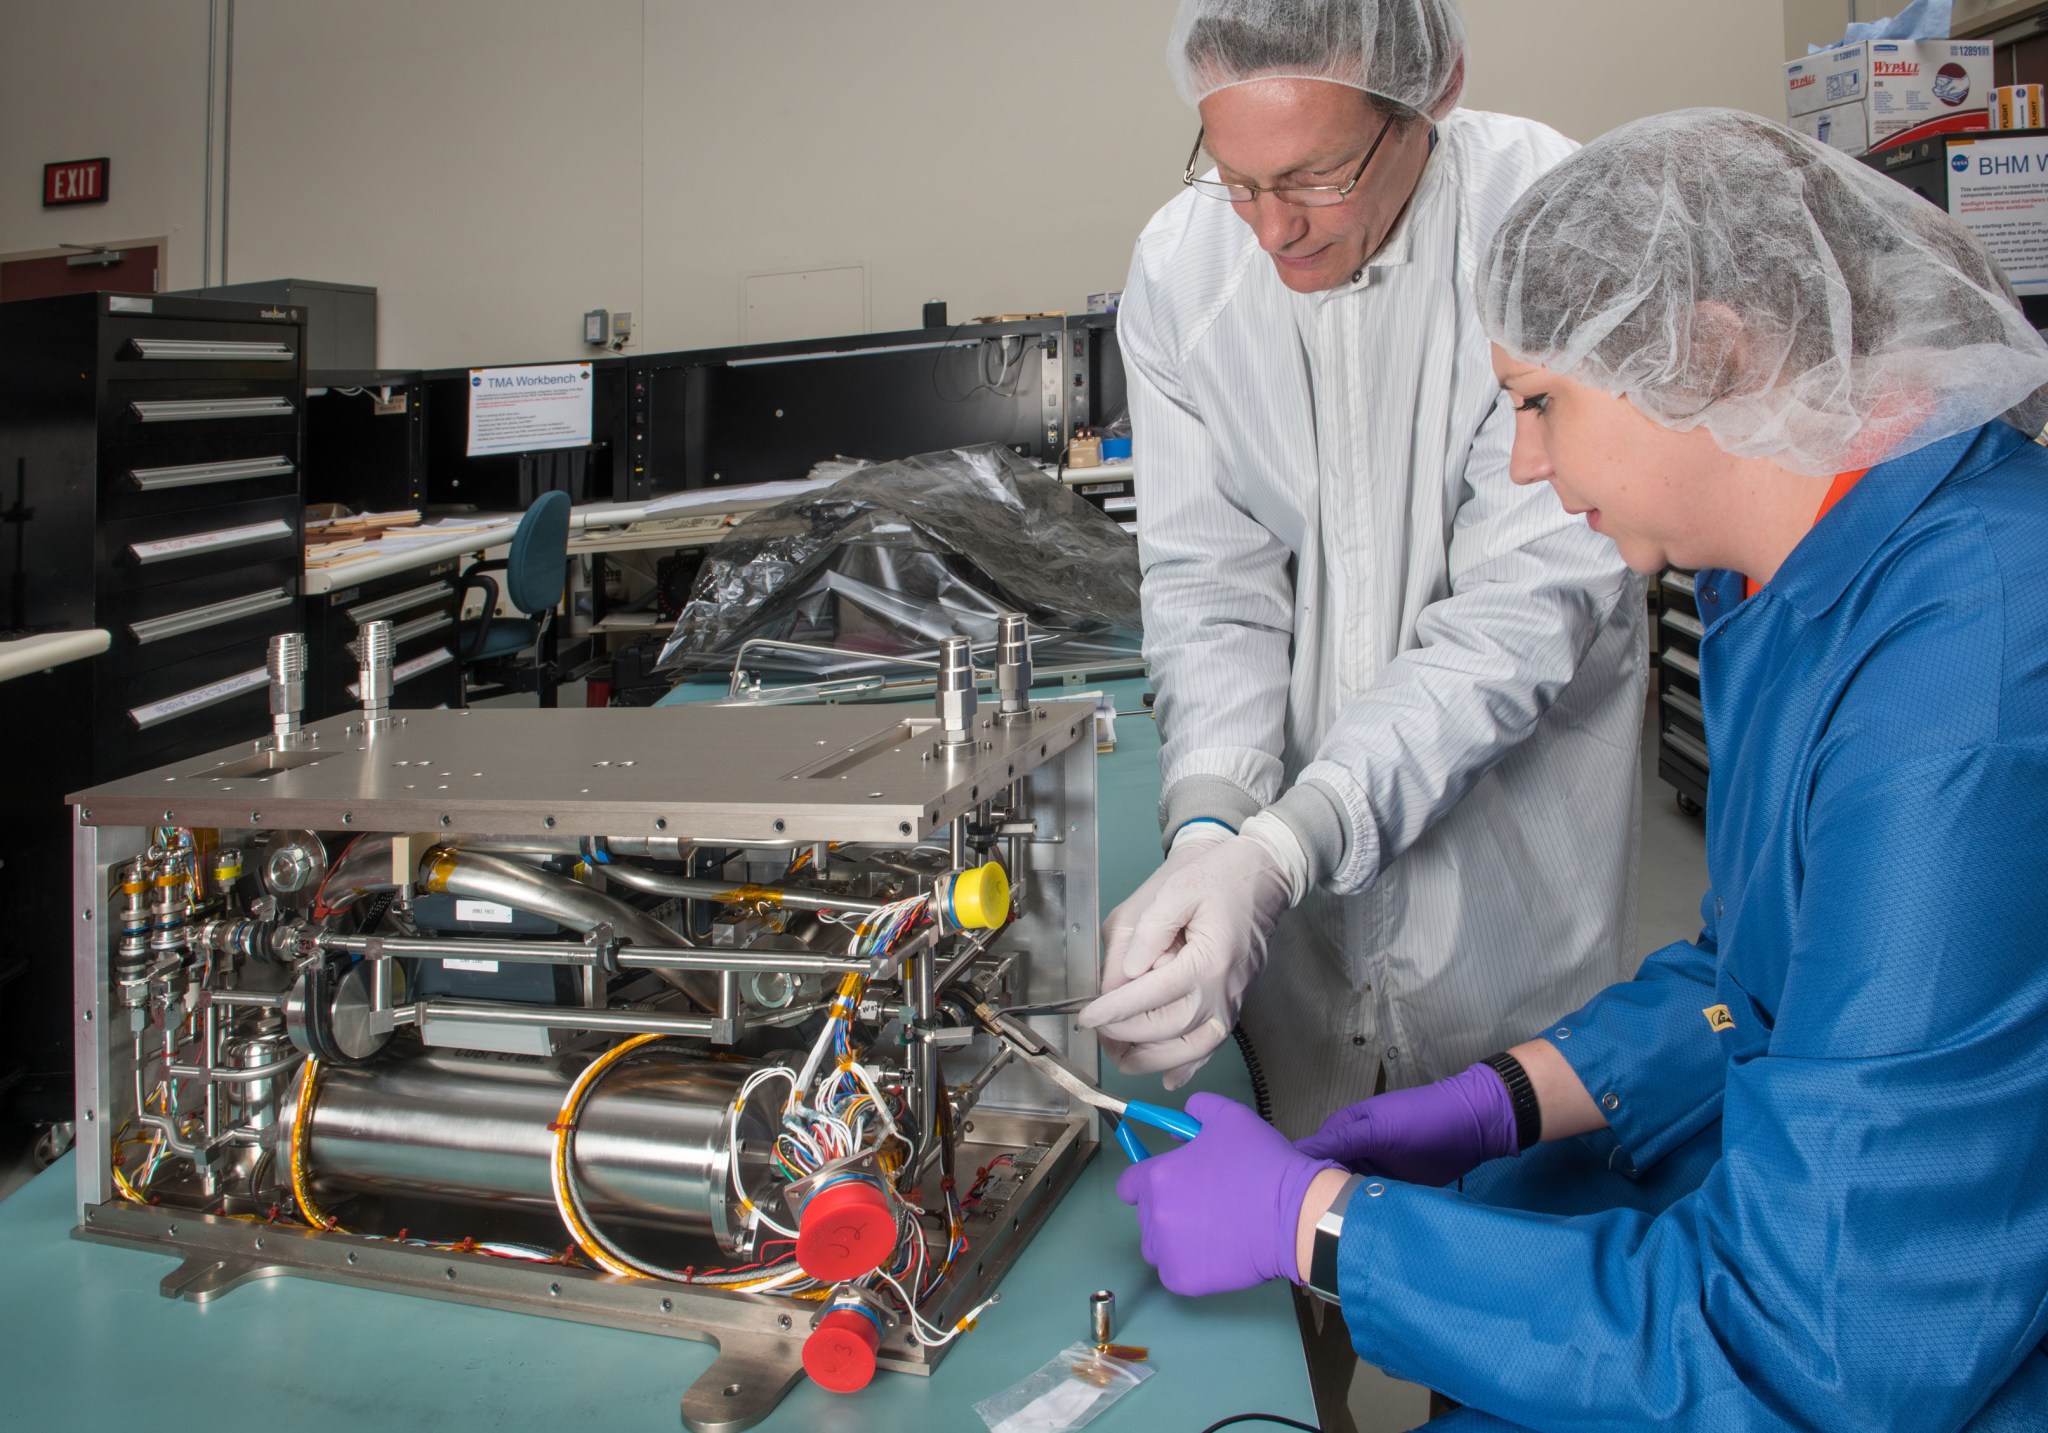 A man and woman in lab coats and hair nets work on space hardware.